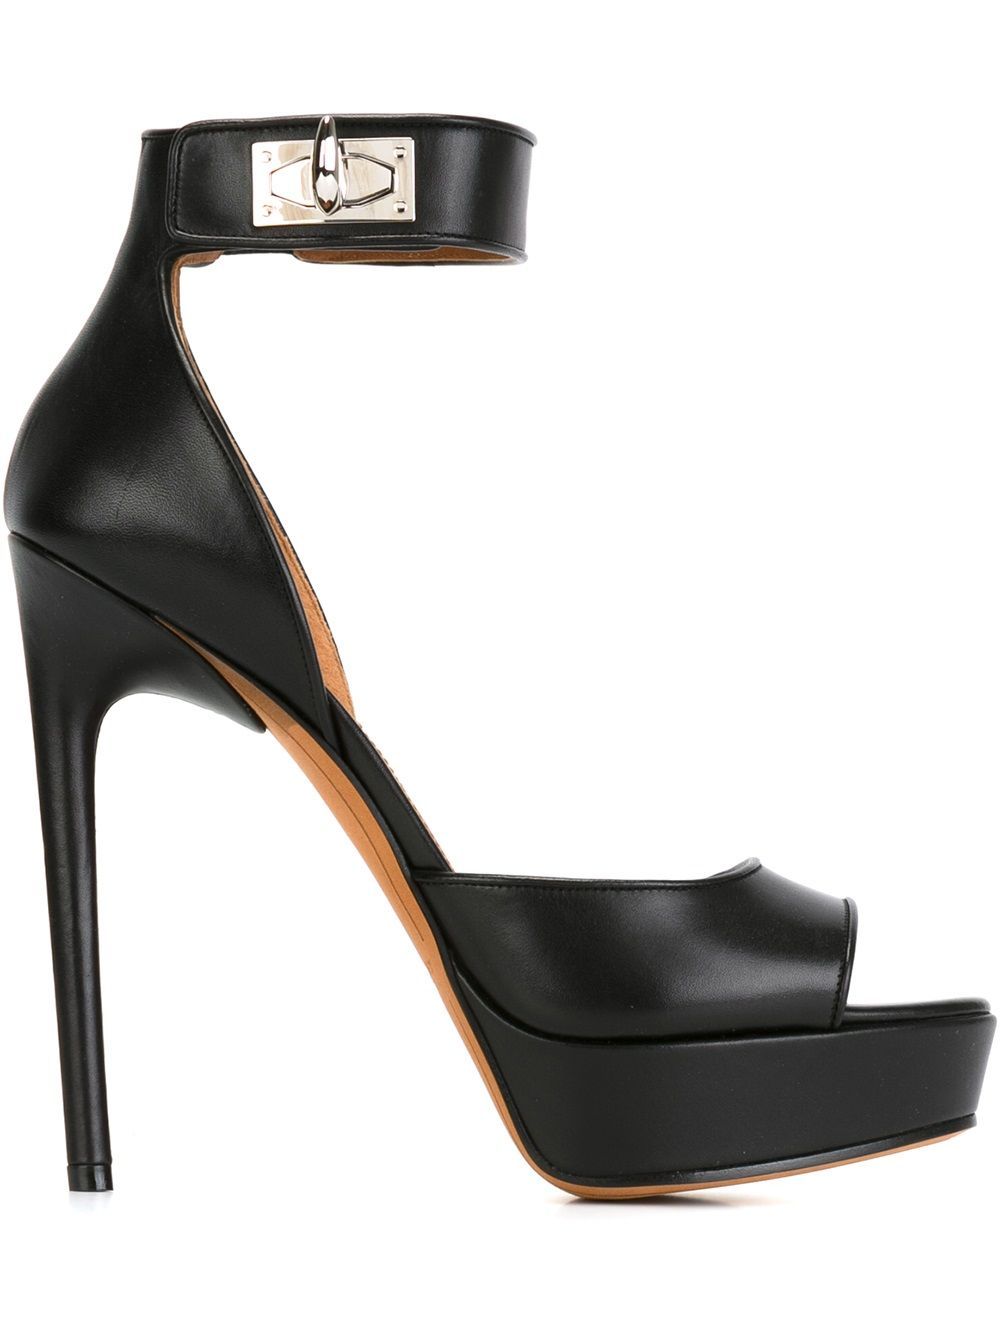 Givenchy Shark Tooth sandals - Black | FarFetch US